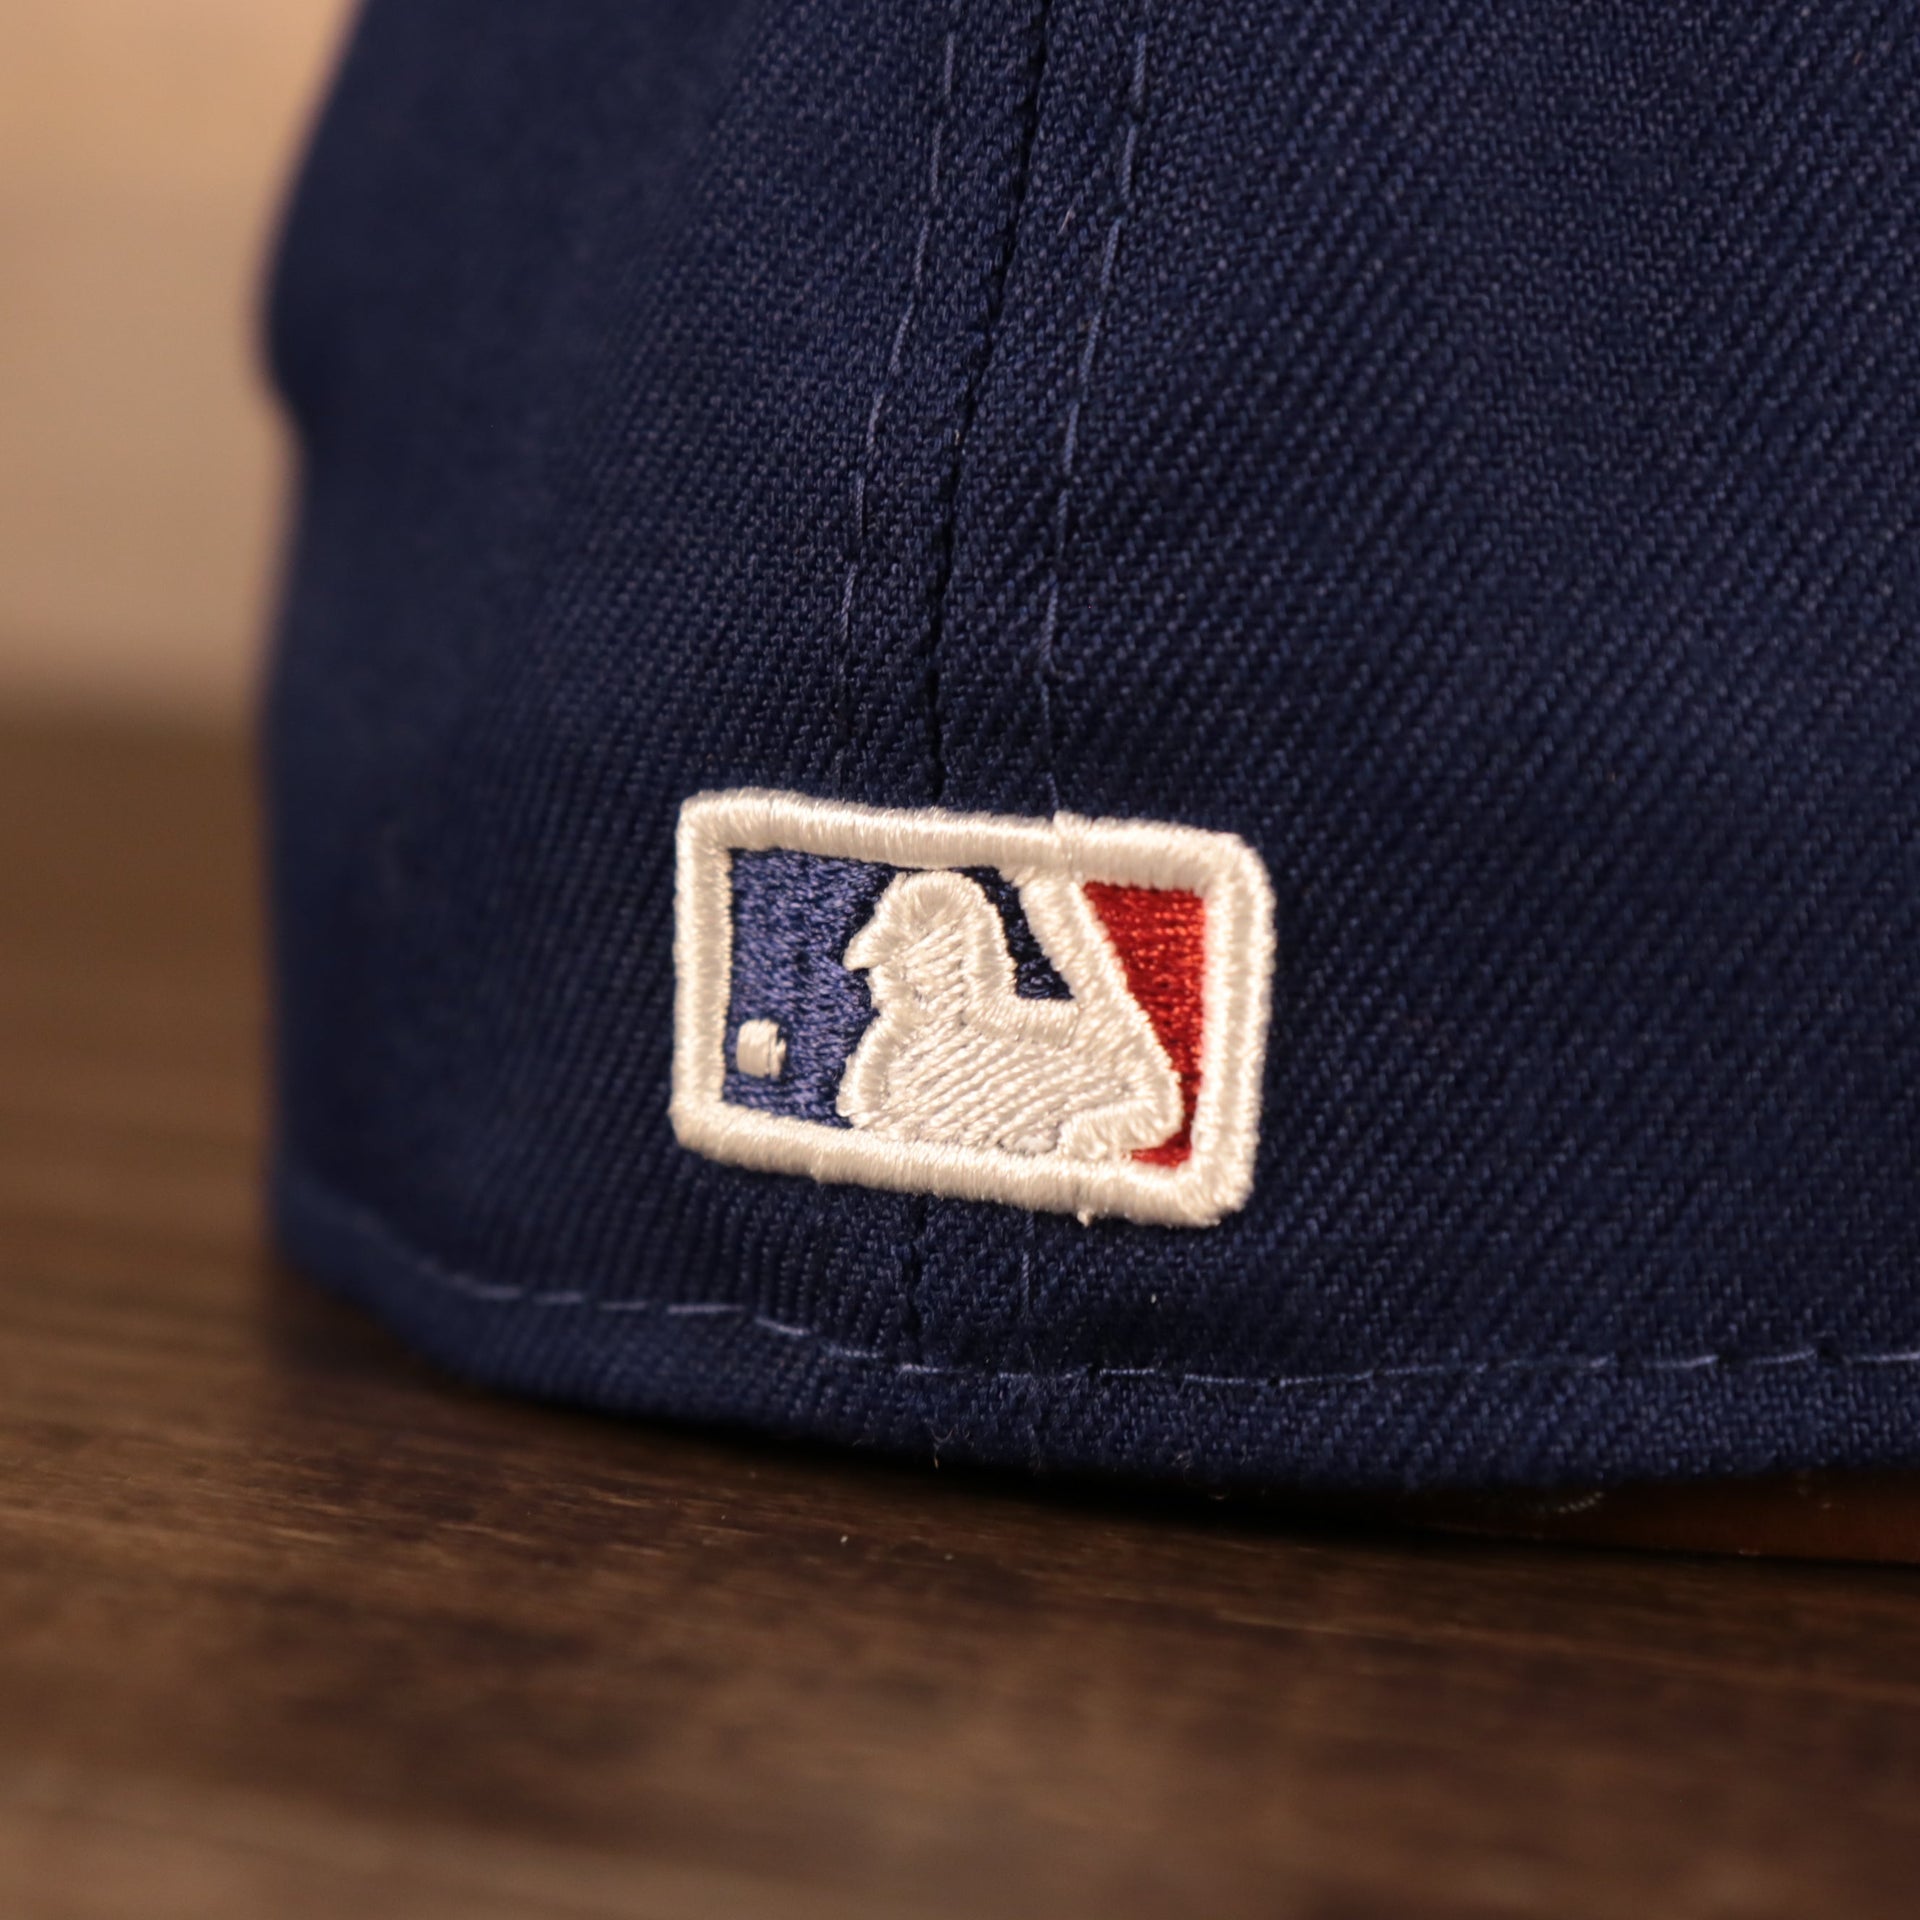 Close up of the MLB Batterman logo on the back of the Los Angeles Dodger Multi-Color Paisley Bandana Under Brim 59Fifty Fitted Cap